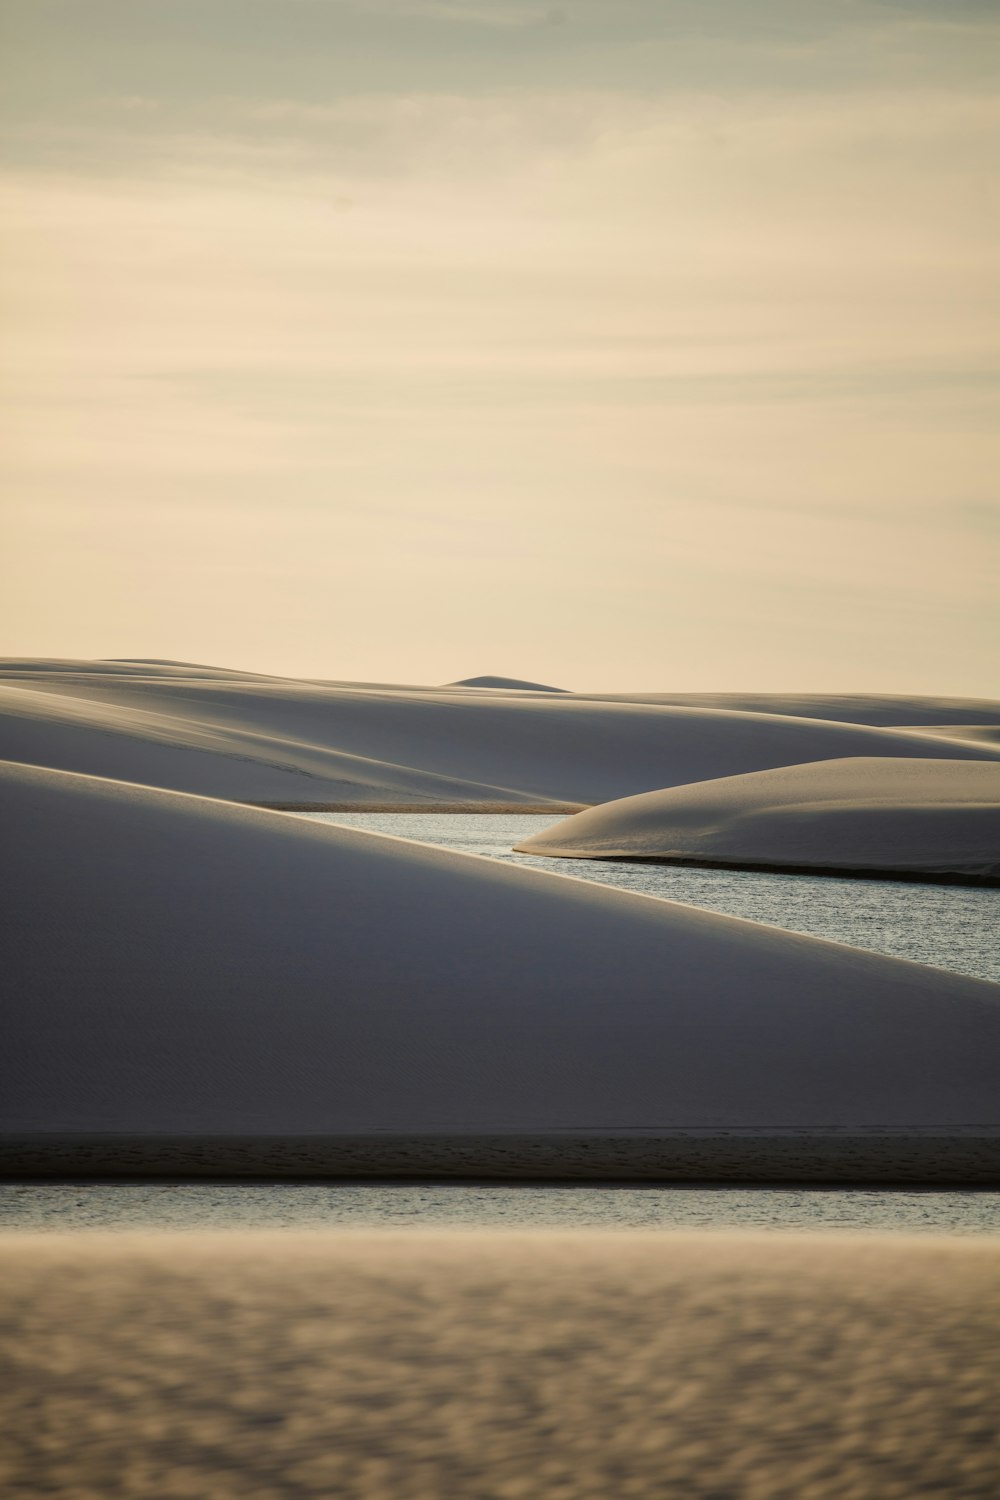 a body of water surrounded by sand dunes